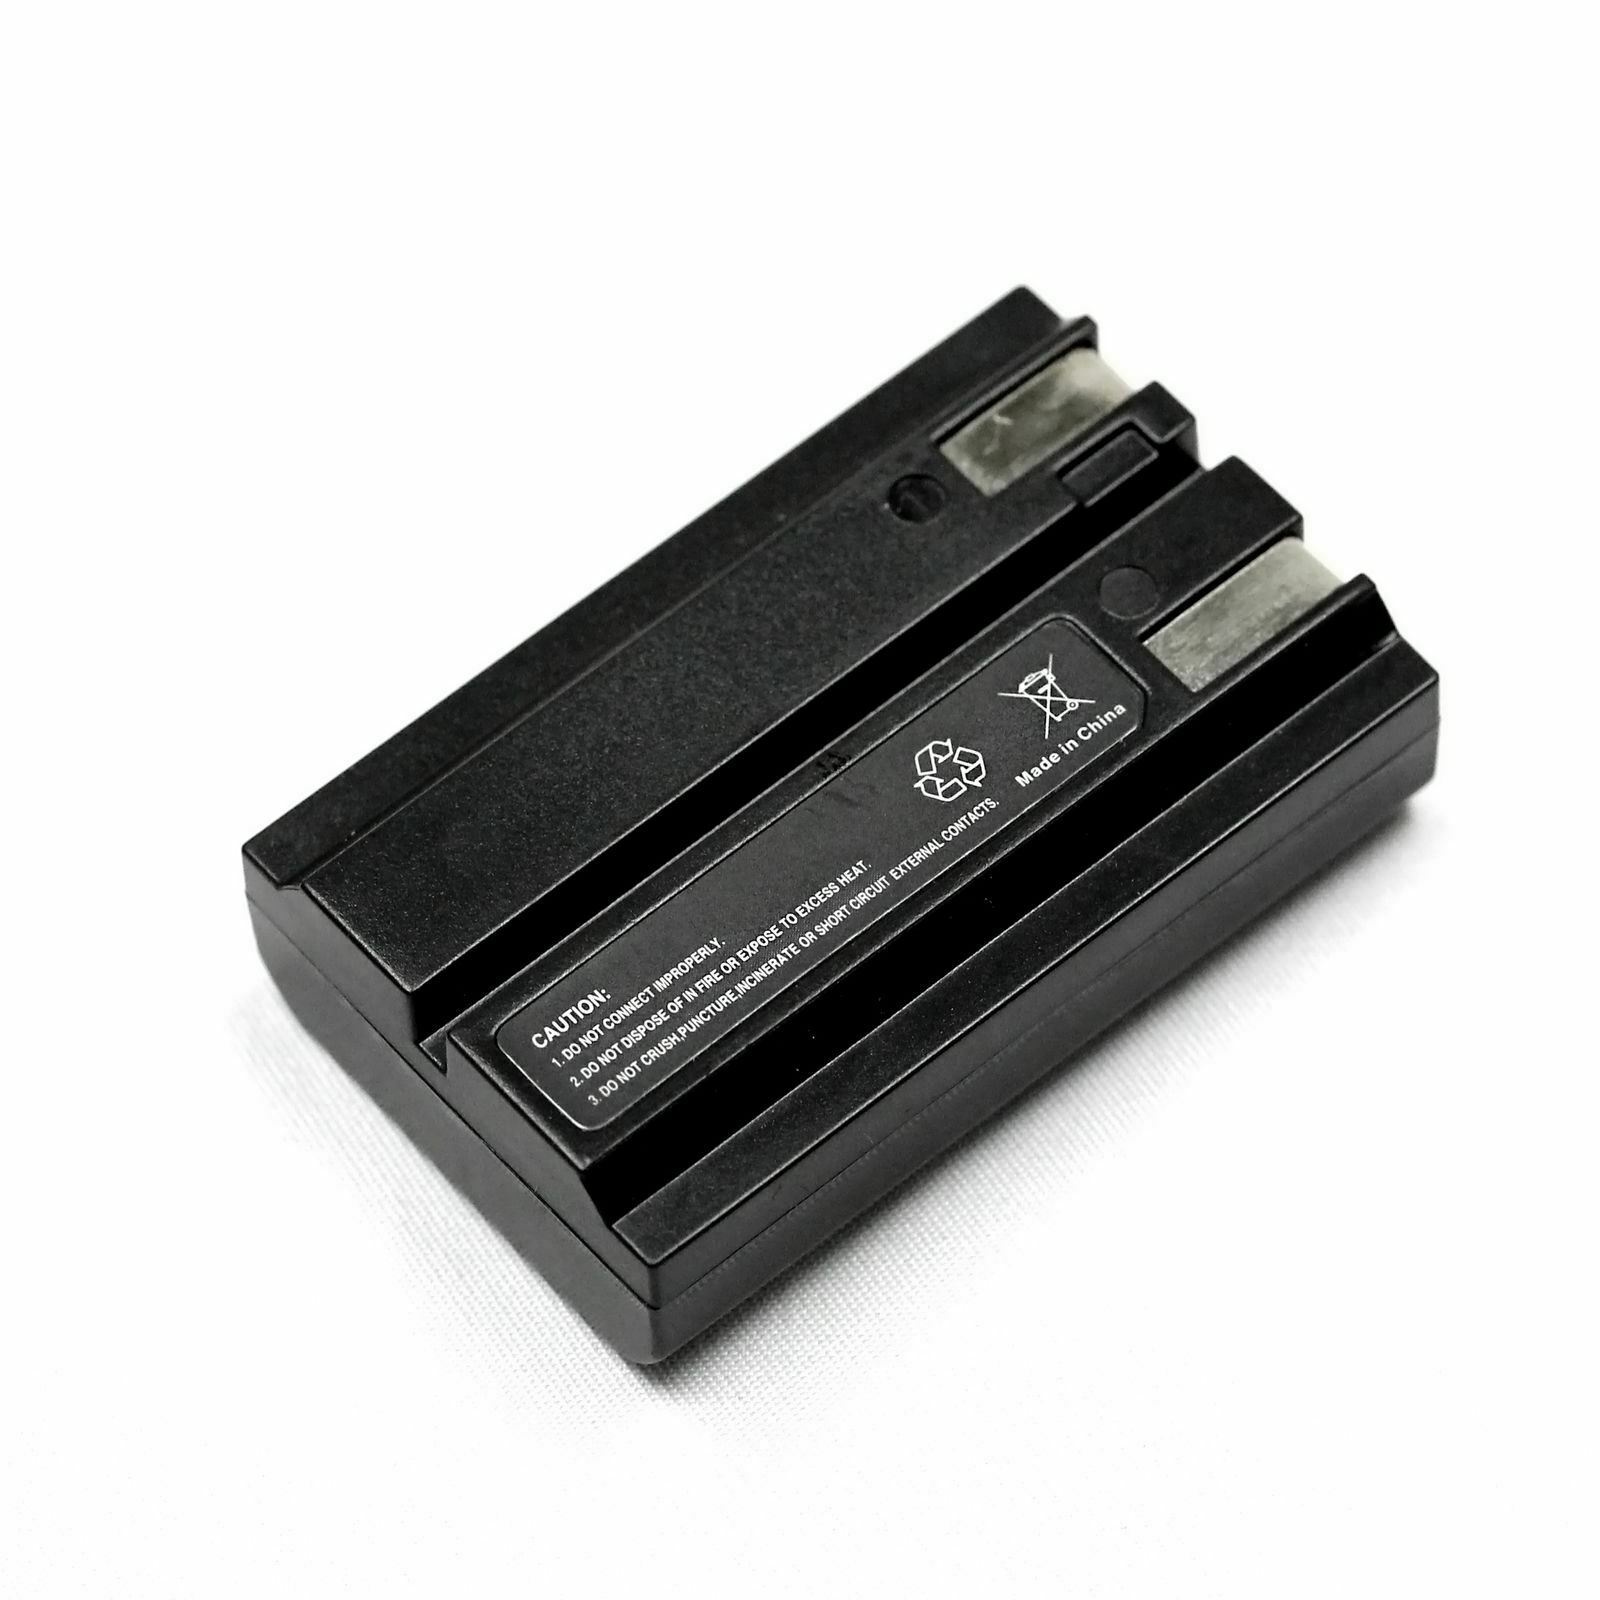 Canon COOLPIX 4800 Camera Battery